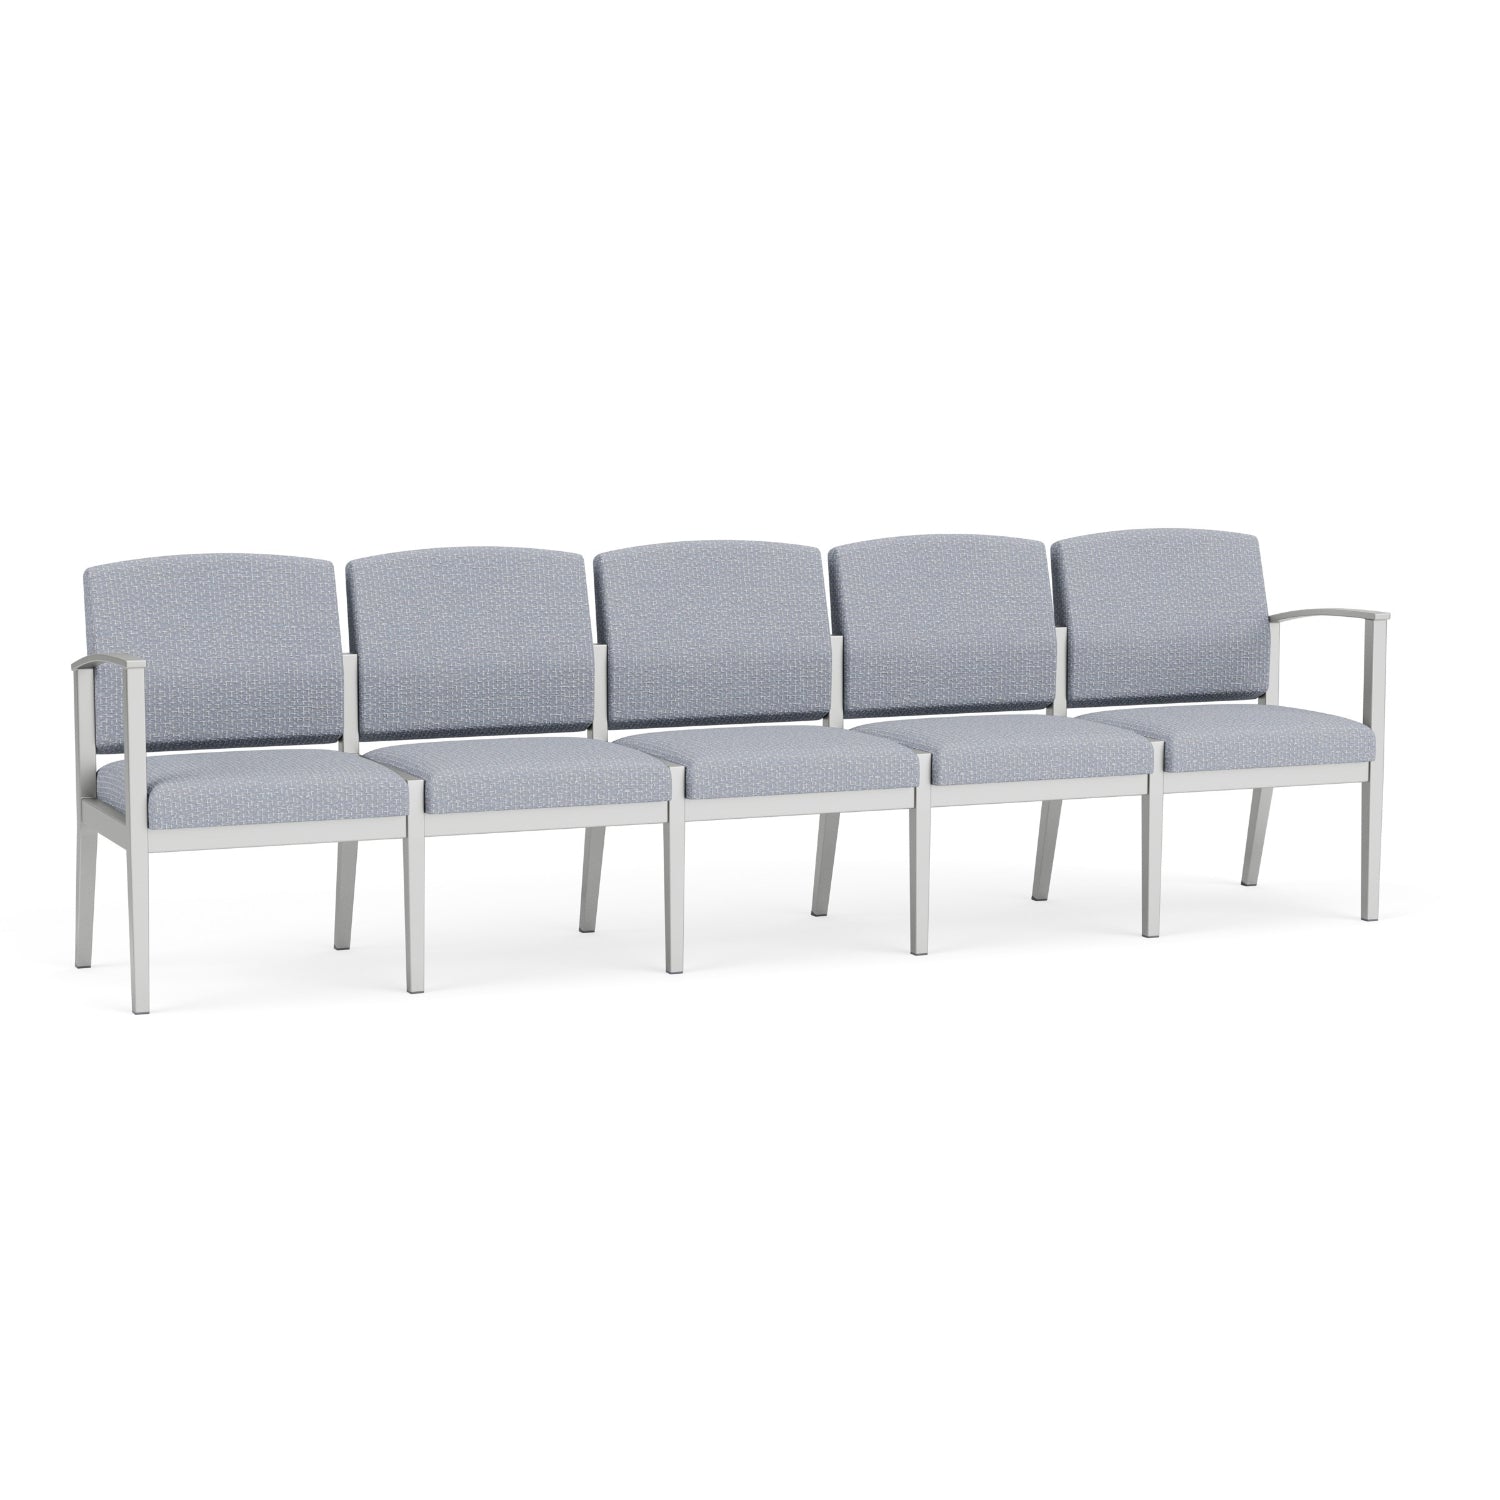 Amherst Steel Collection Reception Seating, 5-Seat Sofa, Designer Fabric Upholstery, FREE SHIPPING